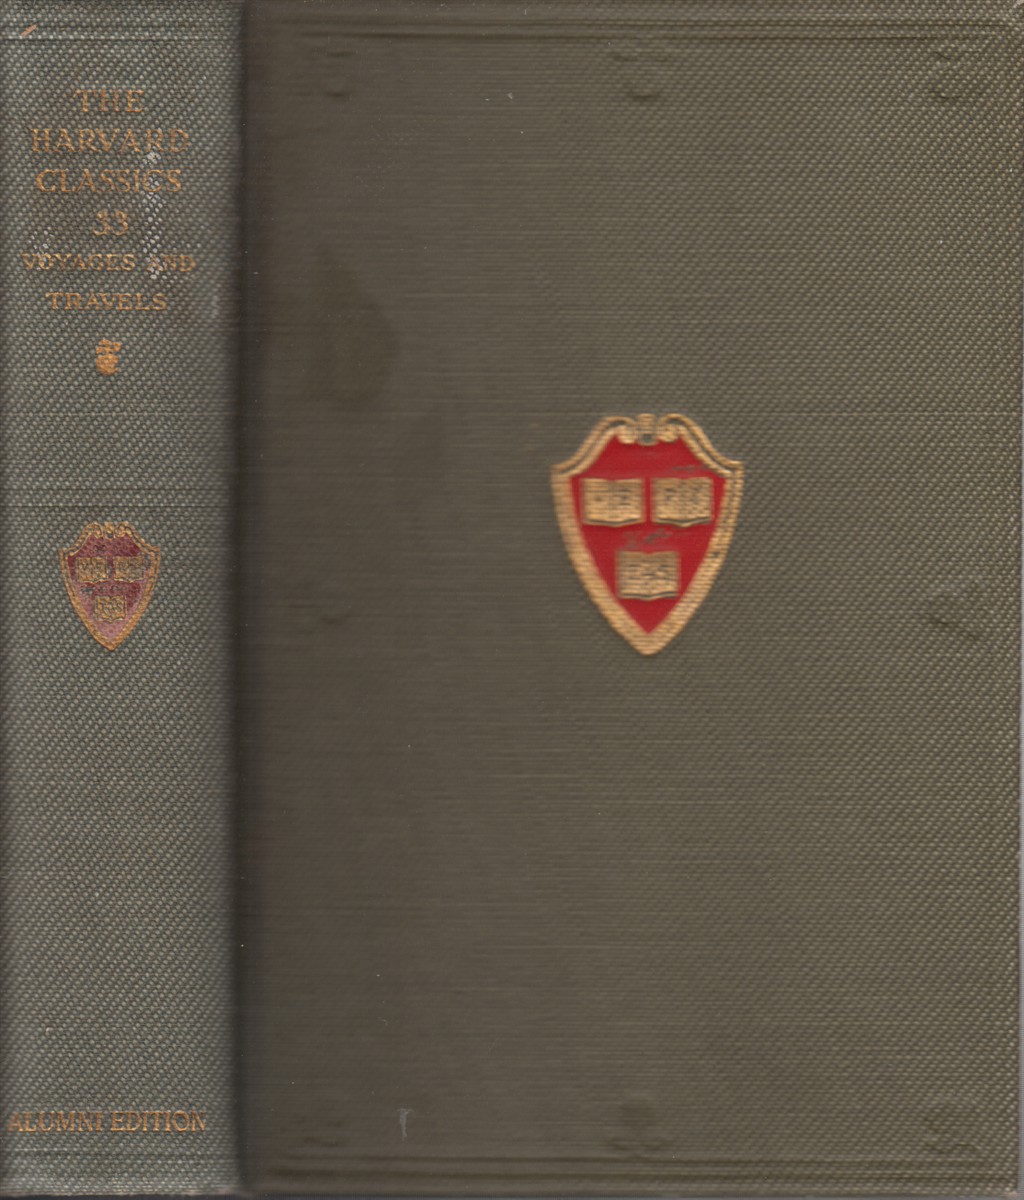 Harvard Classics Volume 33. Voyages and Travels - Eliot, Charles W.